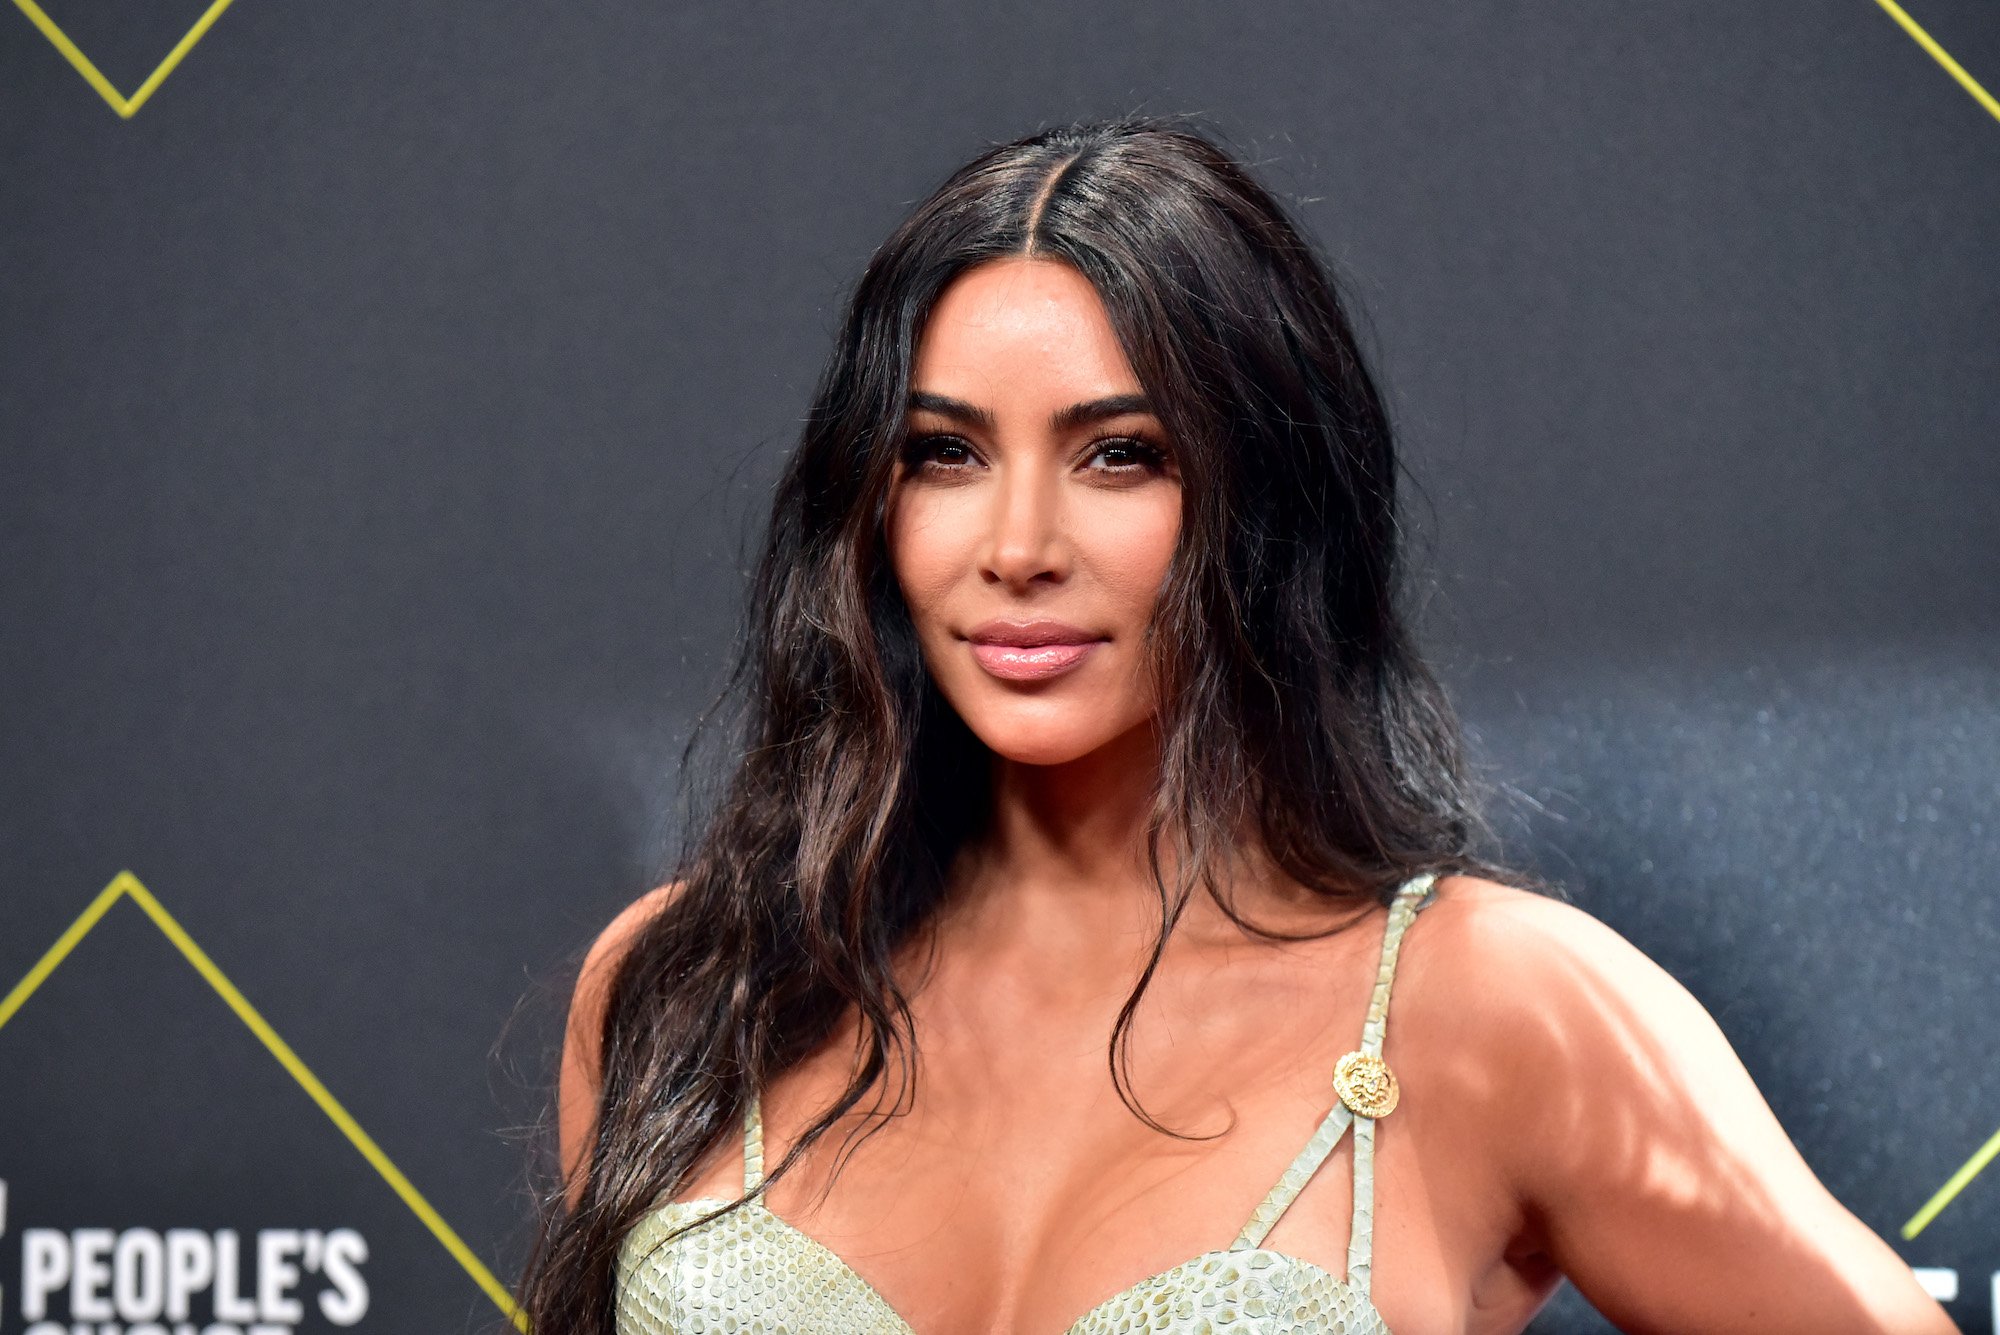 Kim Kardashian fans are skeptical about giving away $ 500,000